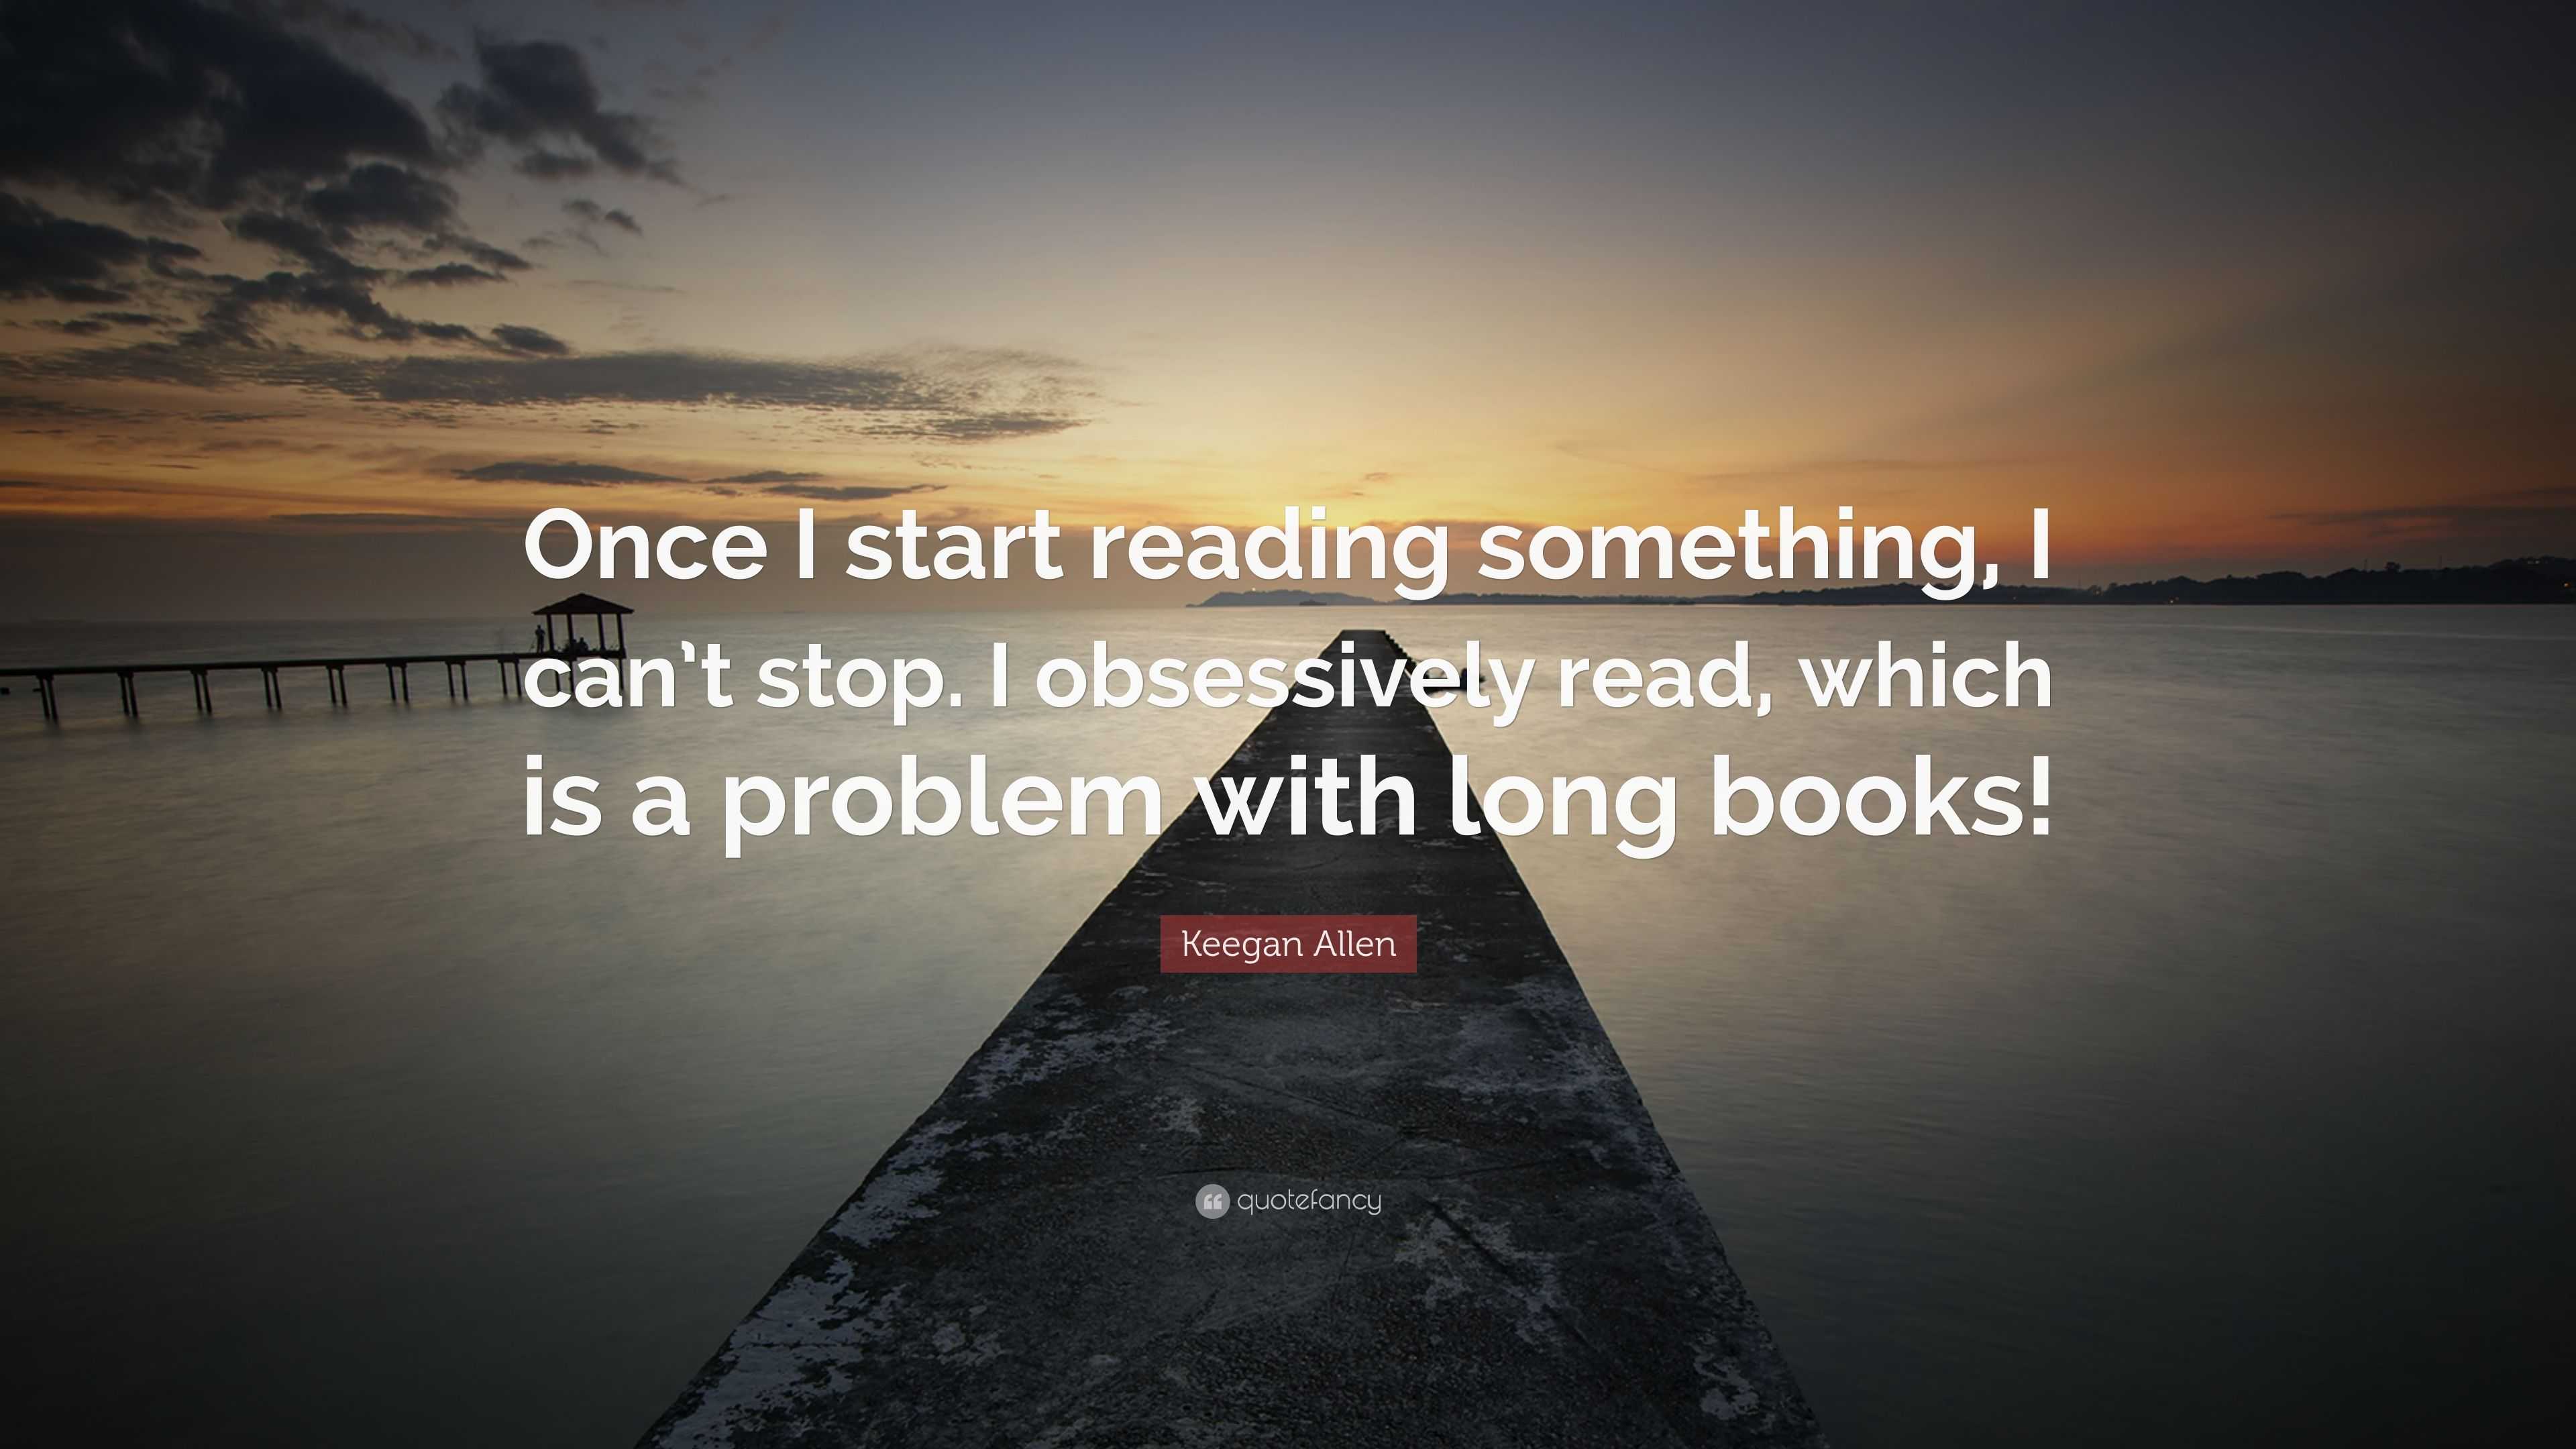 Why I Can't Stop Reading